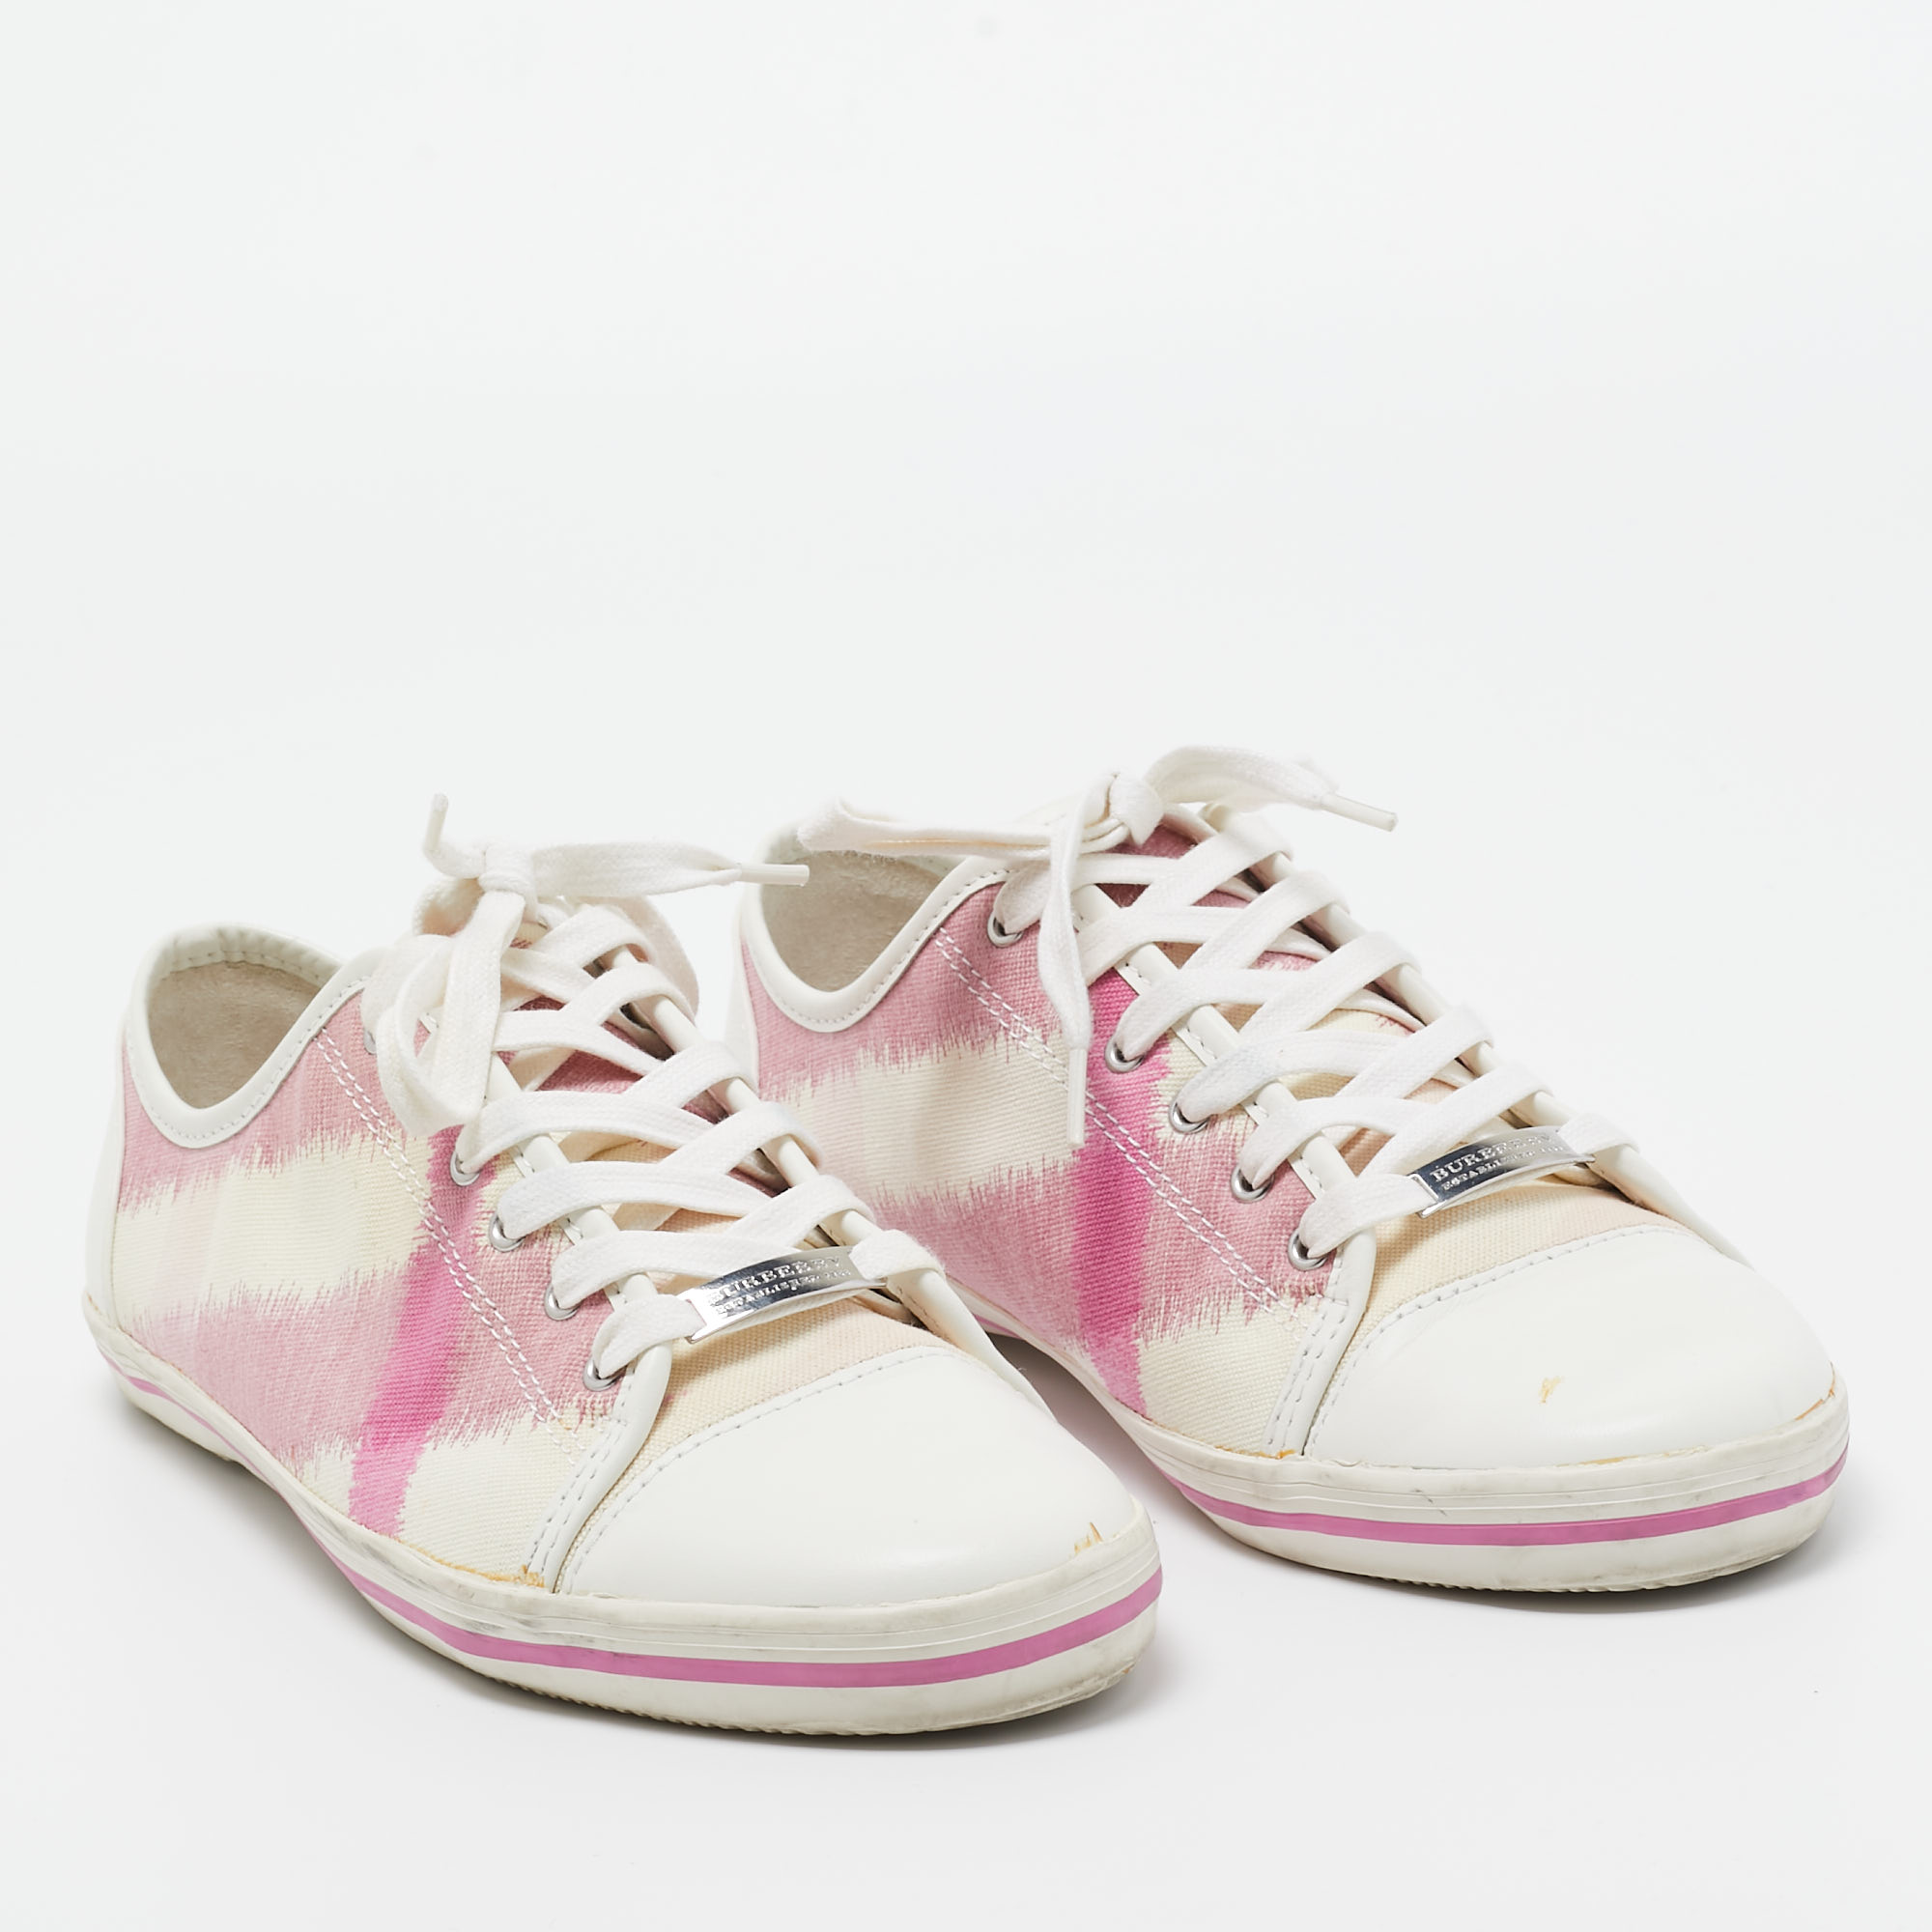 Burberry Pink/White Leather And Canvas Cap Toe Low Top Sneakers Size 41